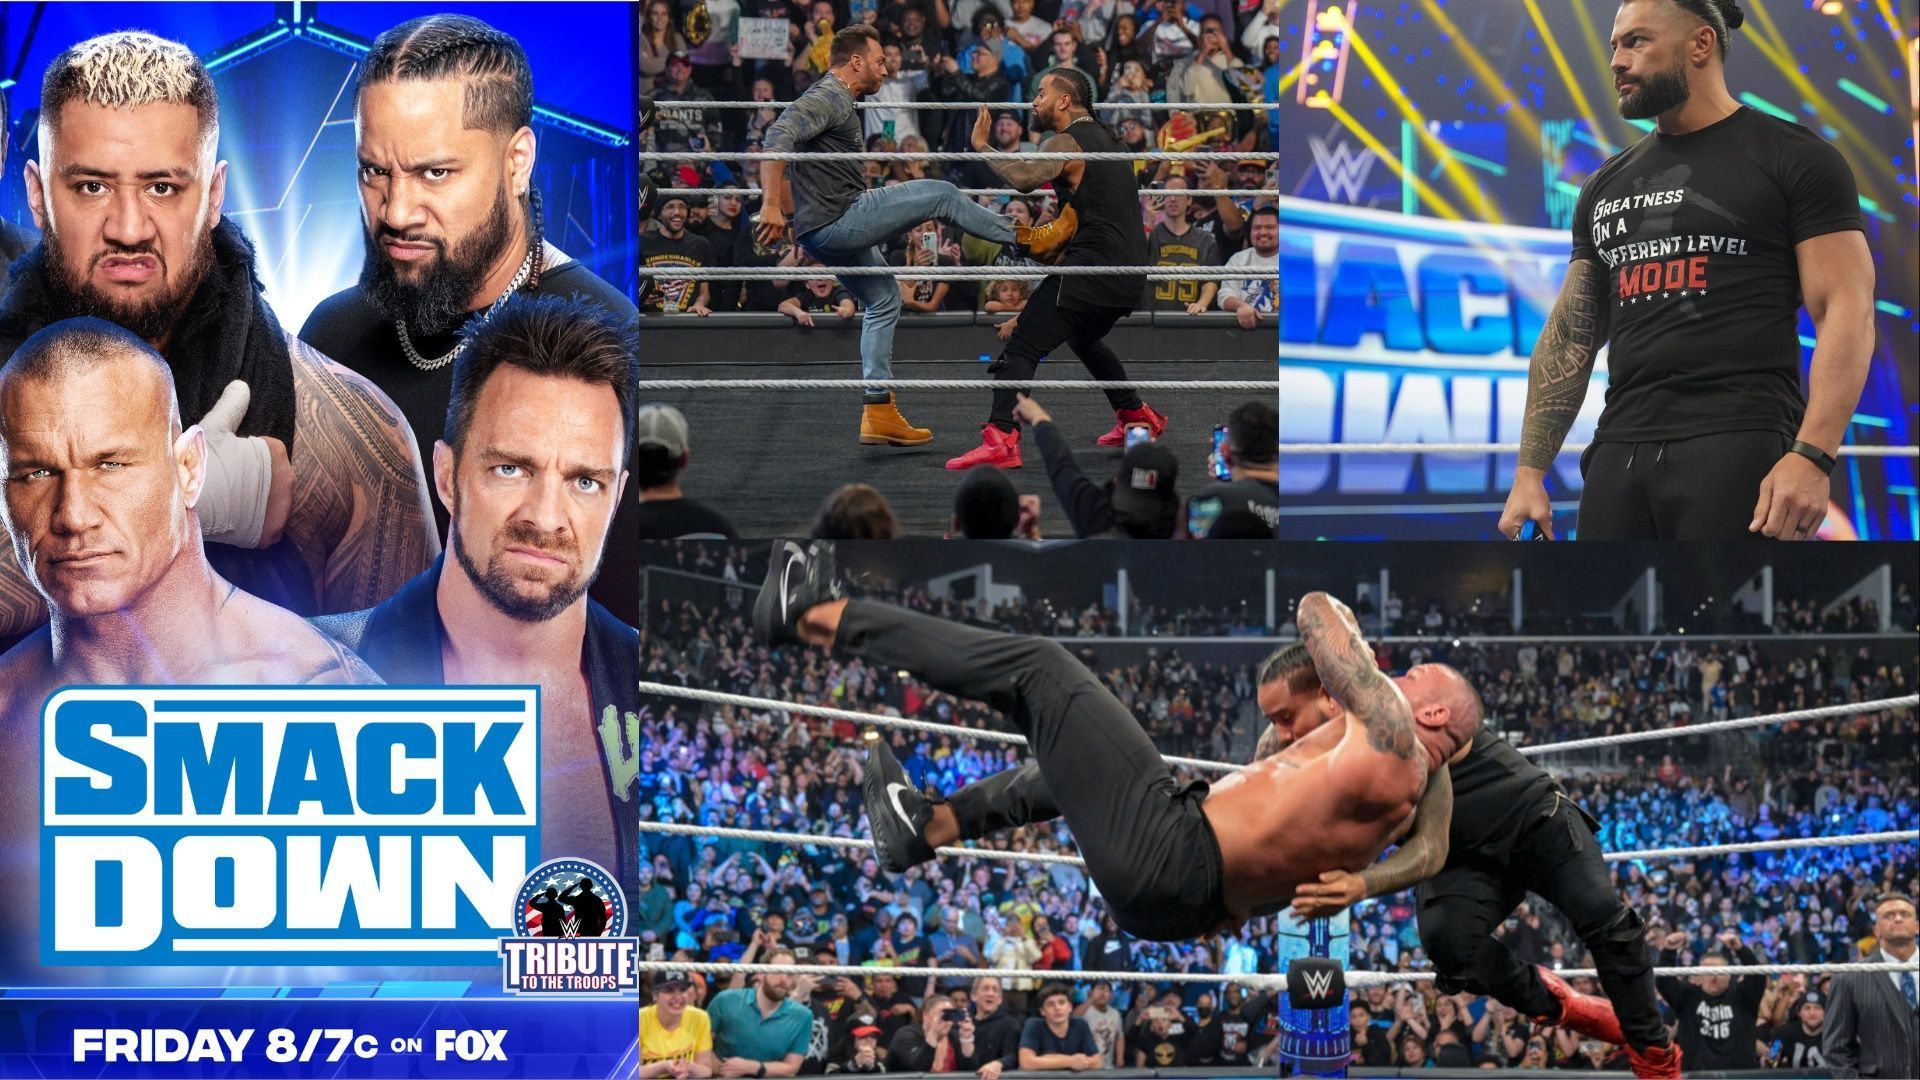 LA Knight and Randy Orton vs. The Bloodline is official for WWE SmackDown.